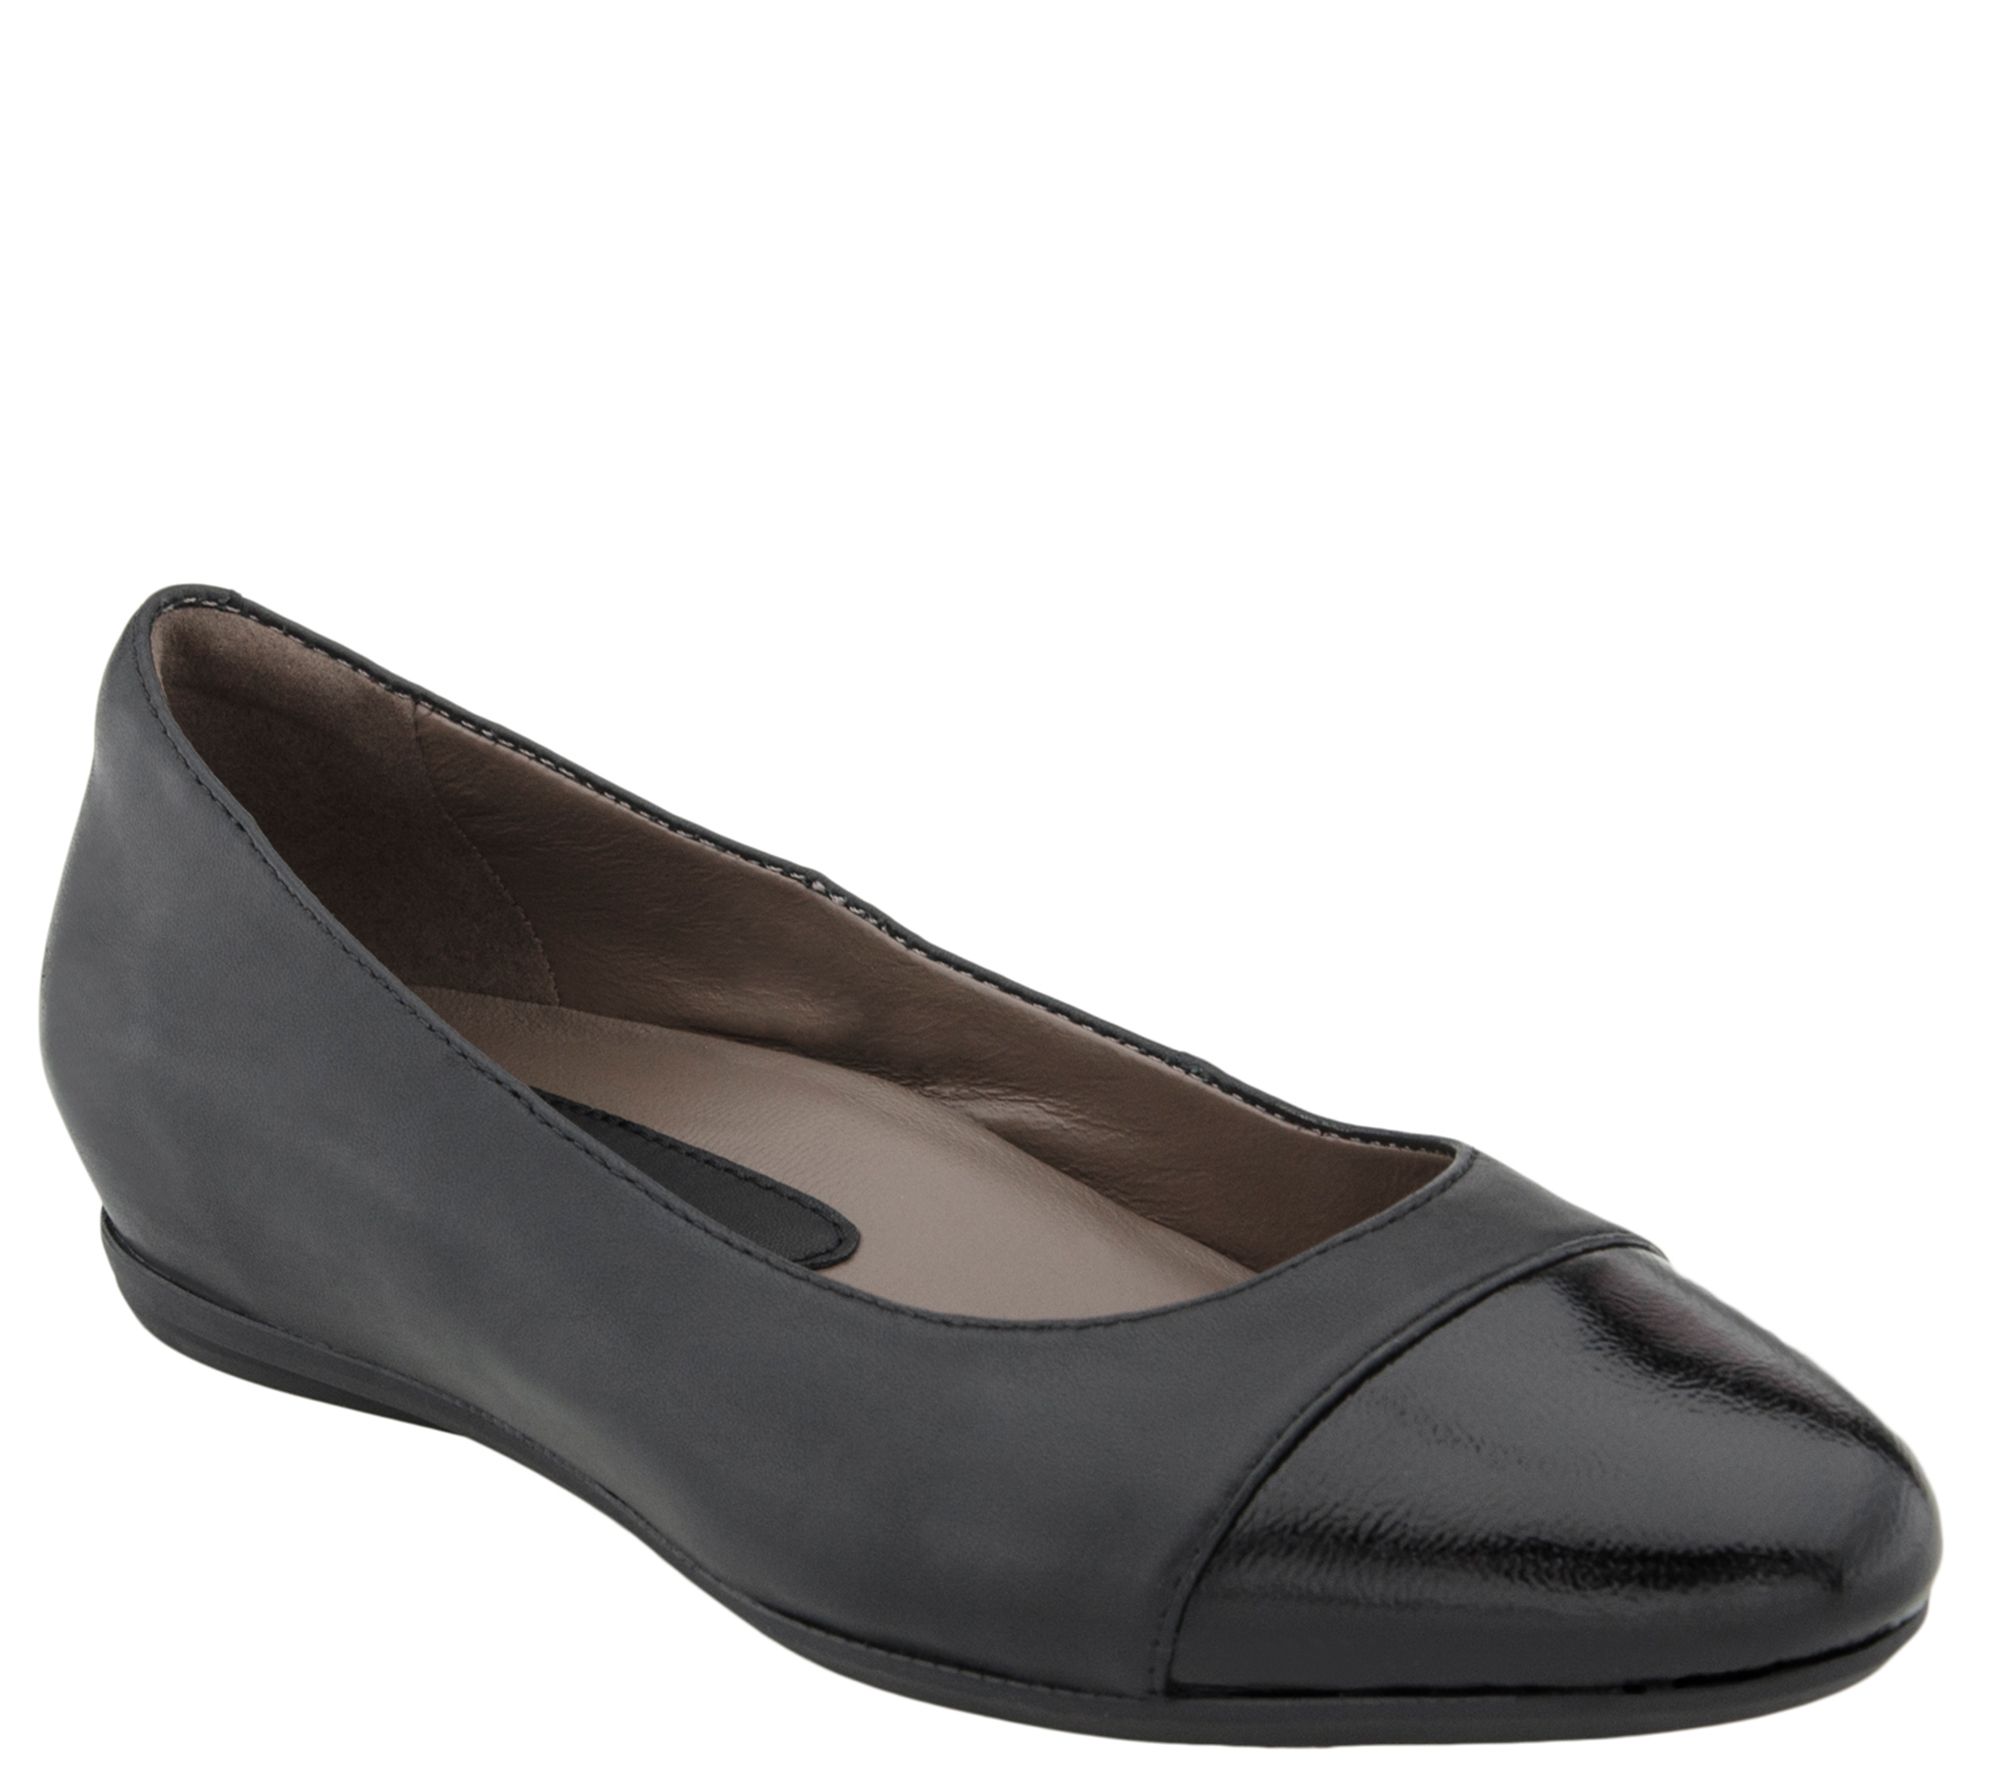 Earthies Leather Slip-on Flats - Hanover - Page 1 — QVC.com